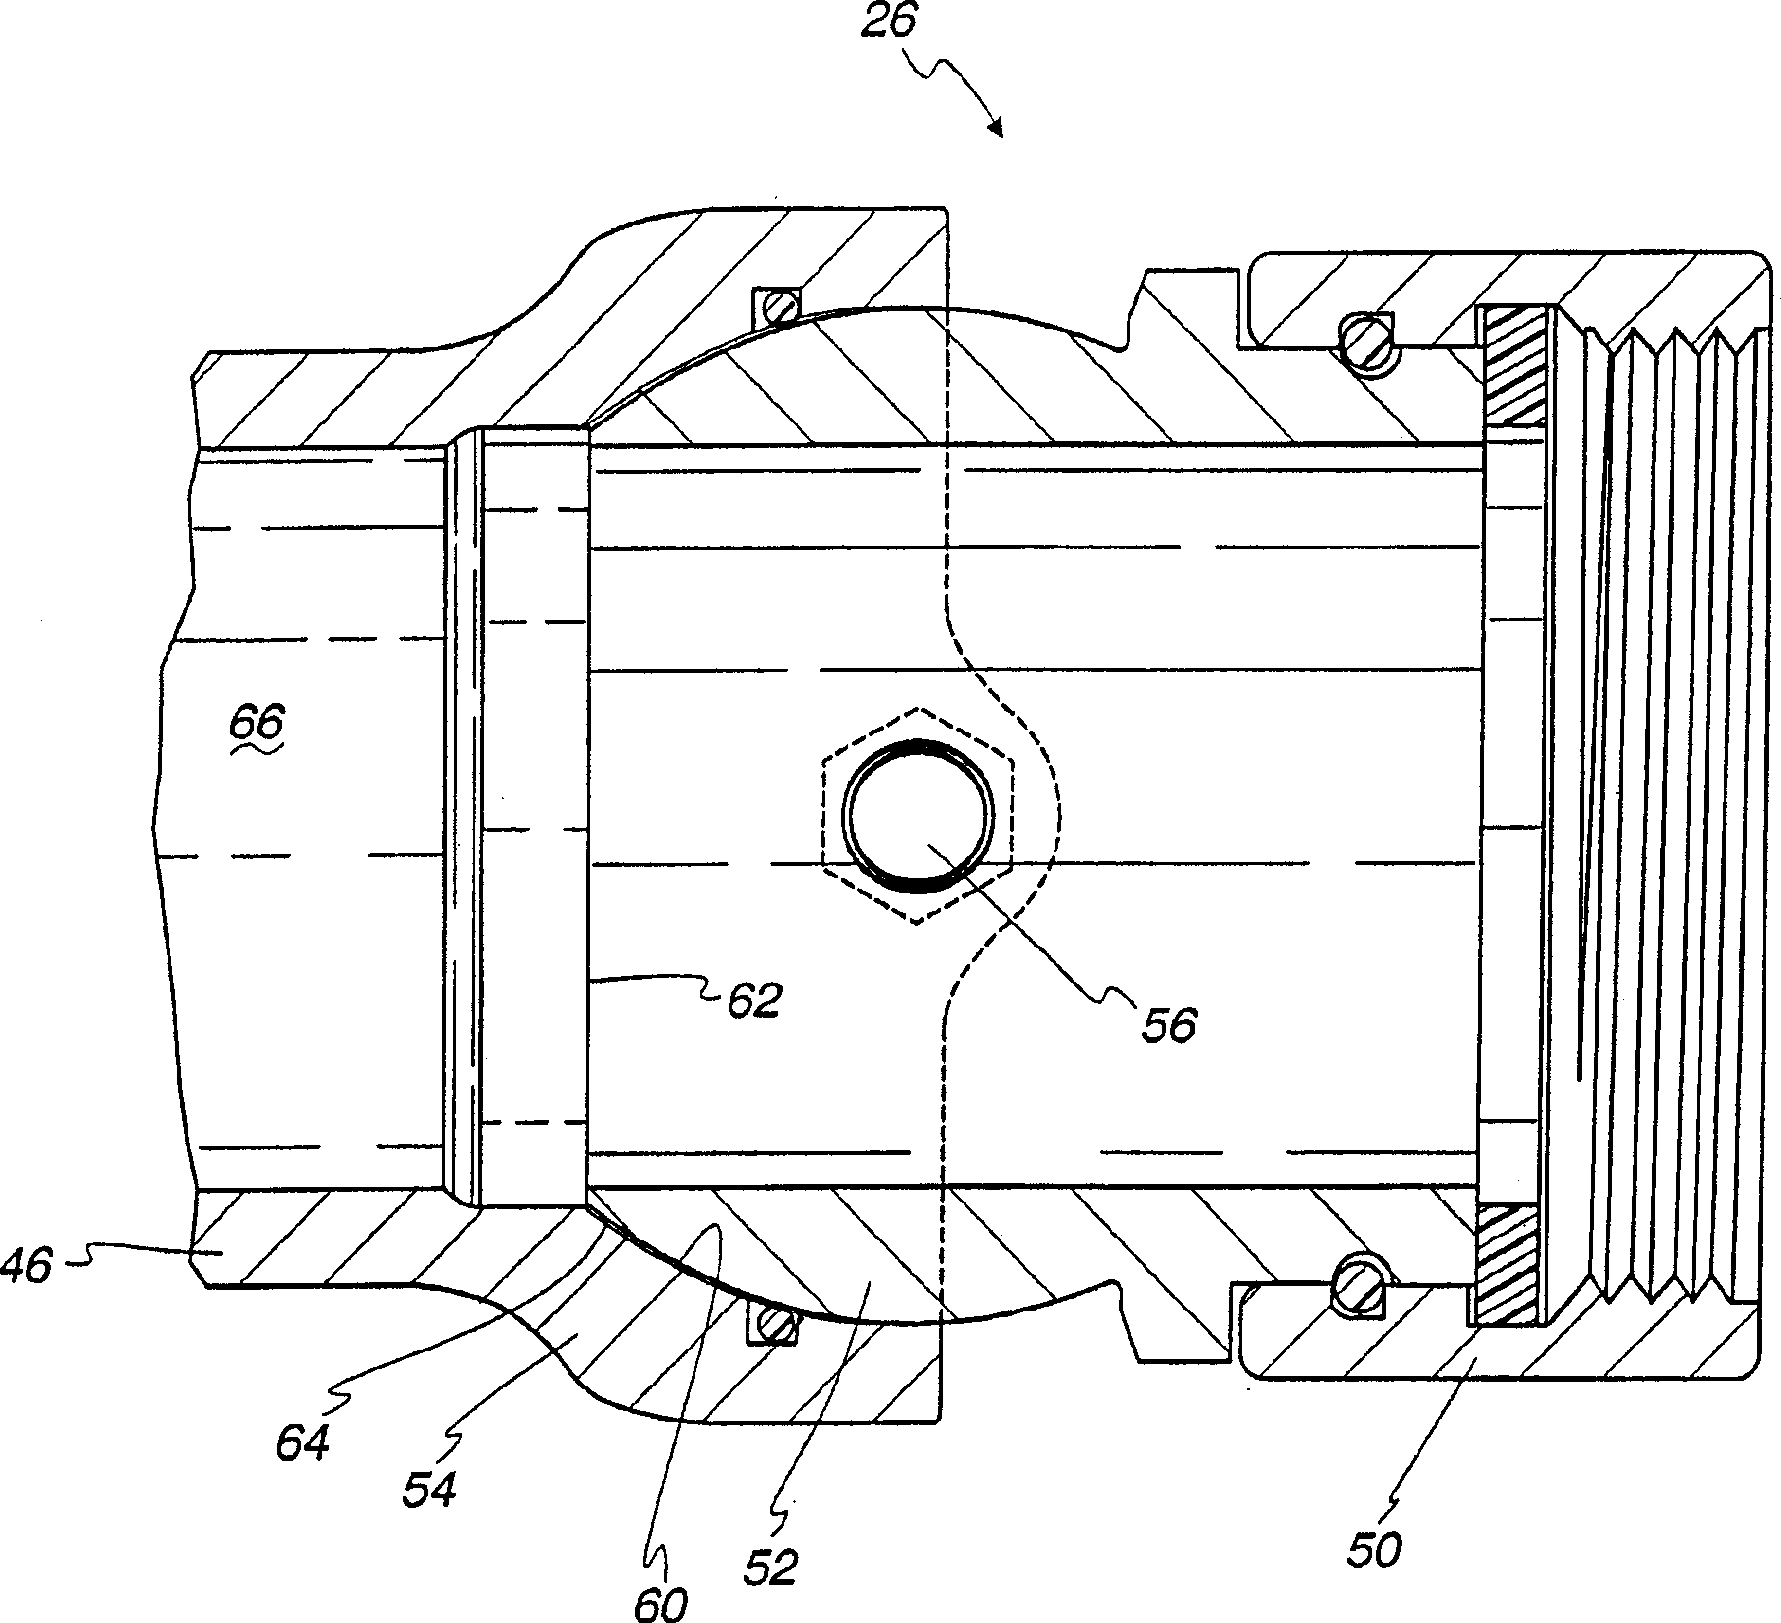 Pivoting fluid conduit joint and one-way brake